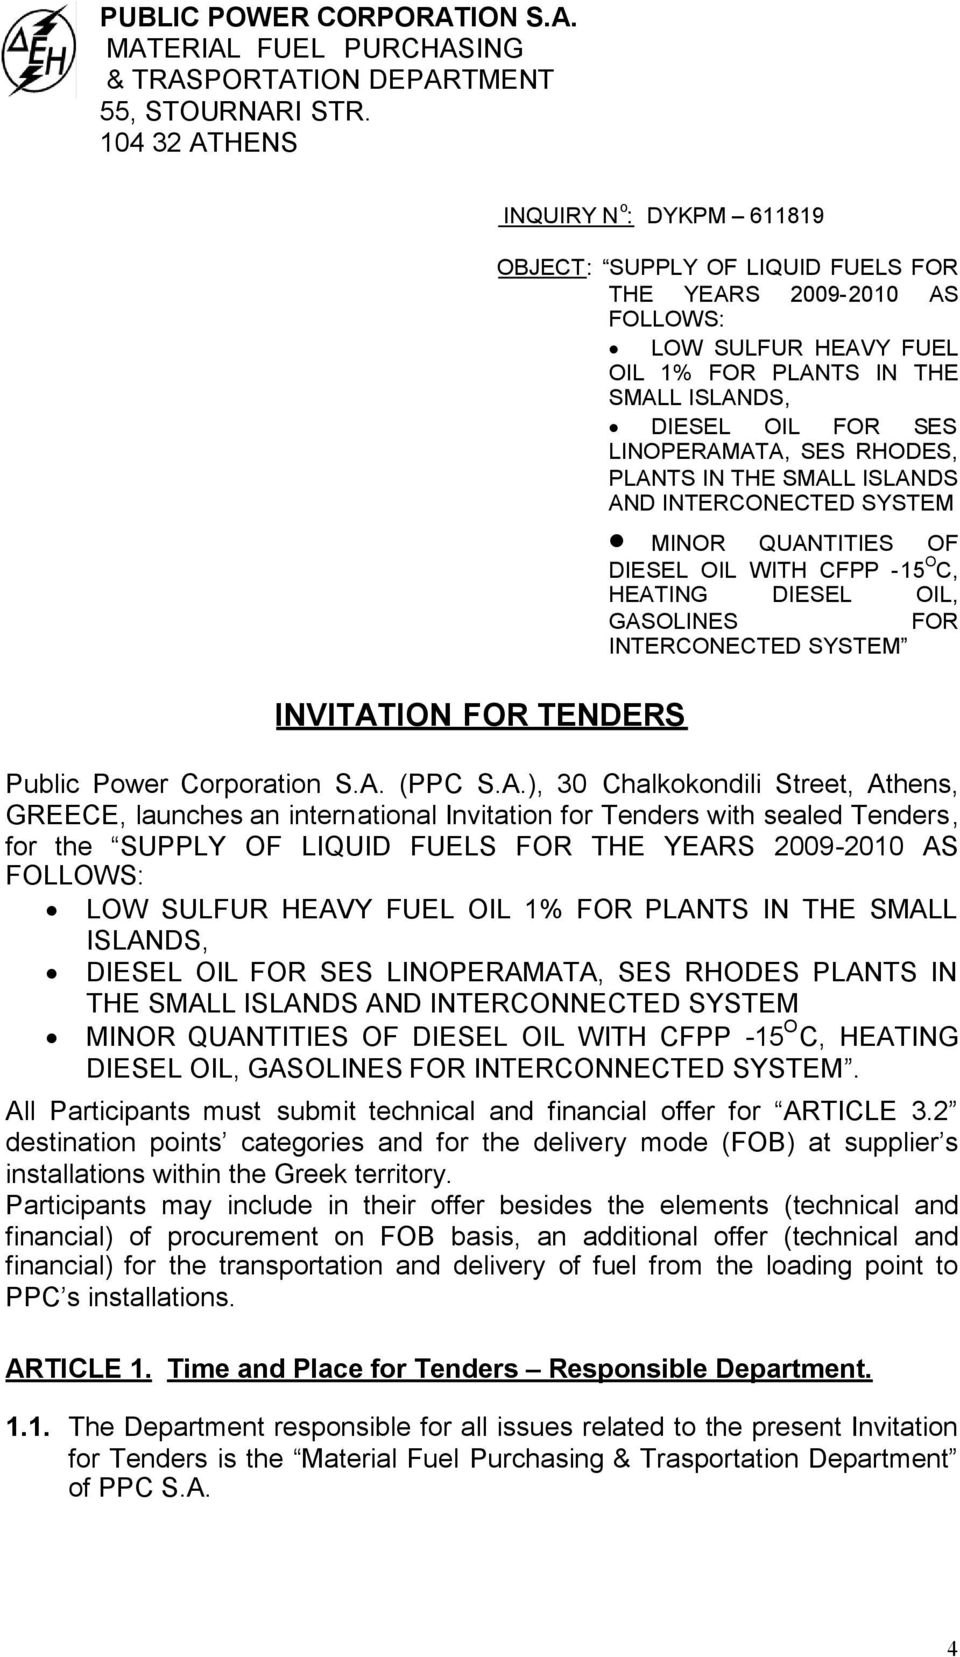 OIL FOR SES LINOPERAMATA, SES RHODES, PLANTS IN THE SMALL ISLANDS AND INTERCONECTED SYSTEM MINOR QUANTITIES OF DIESEL OIL WITH CFPP -15 O C, HEATING DIESEL OIL, GASOLINES FOR INTERCONECTED SYSTEM